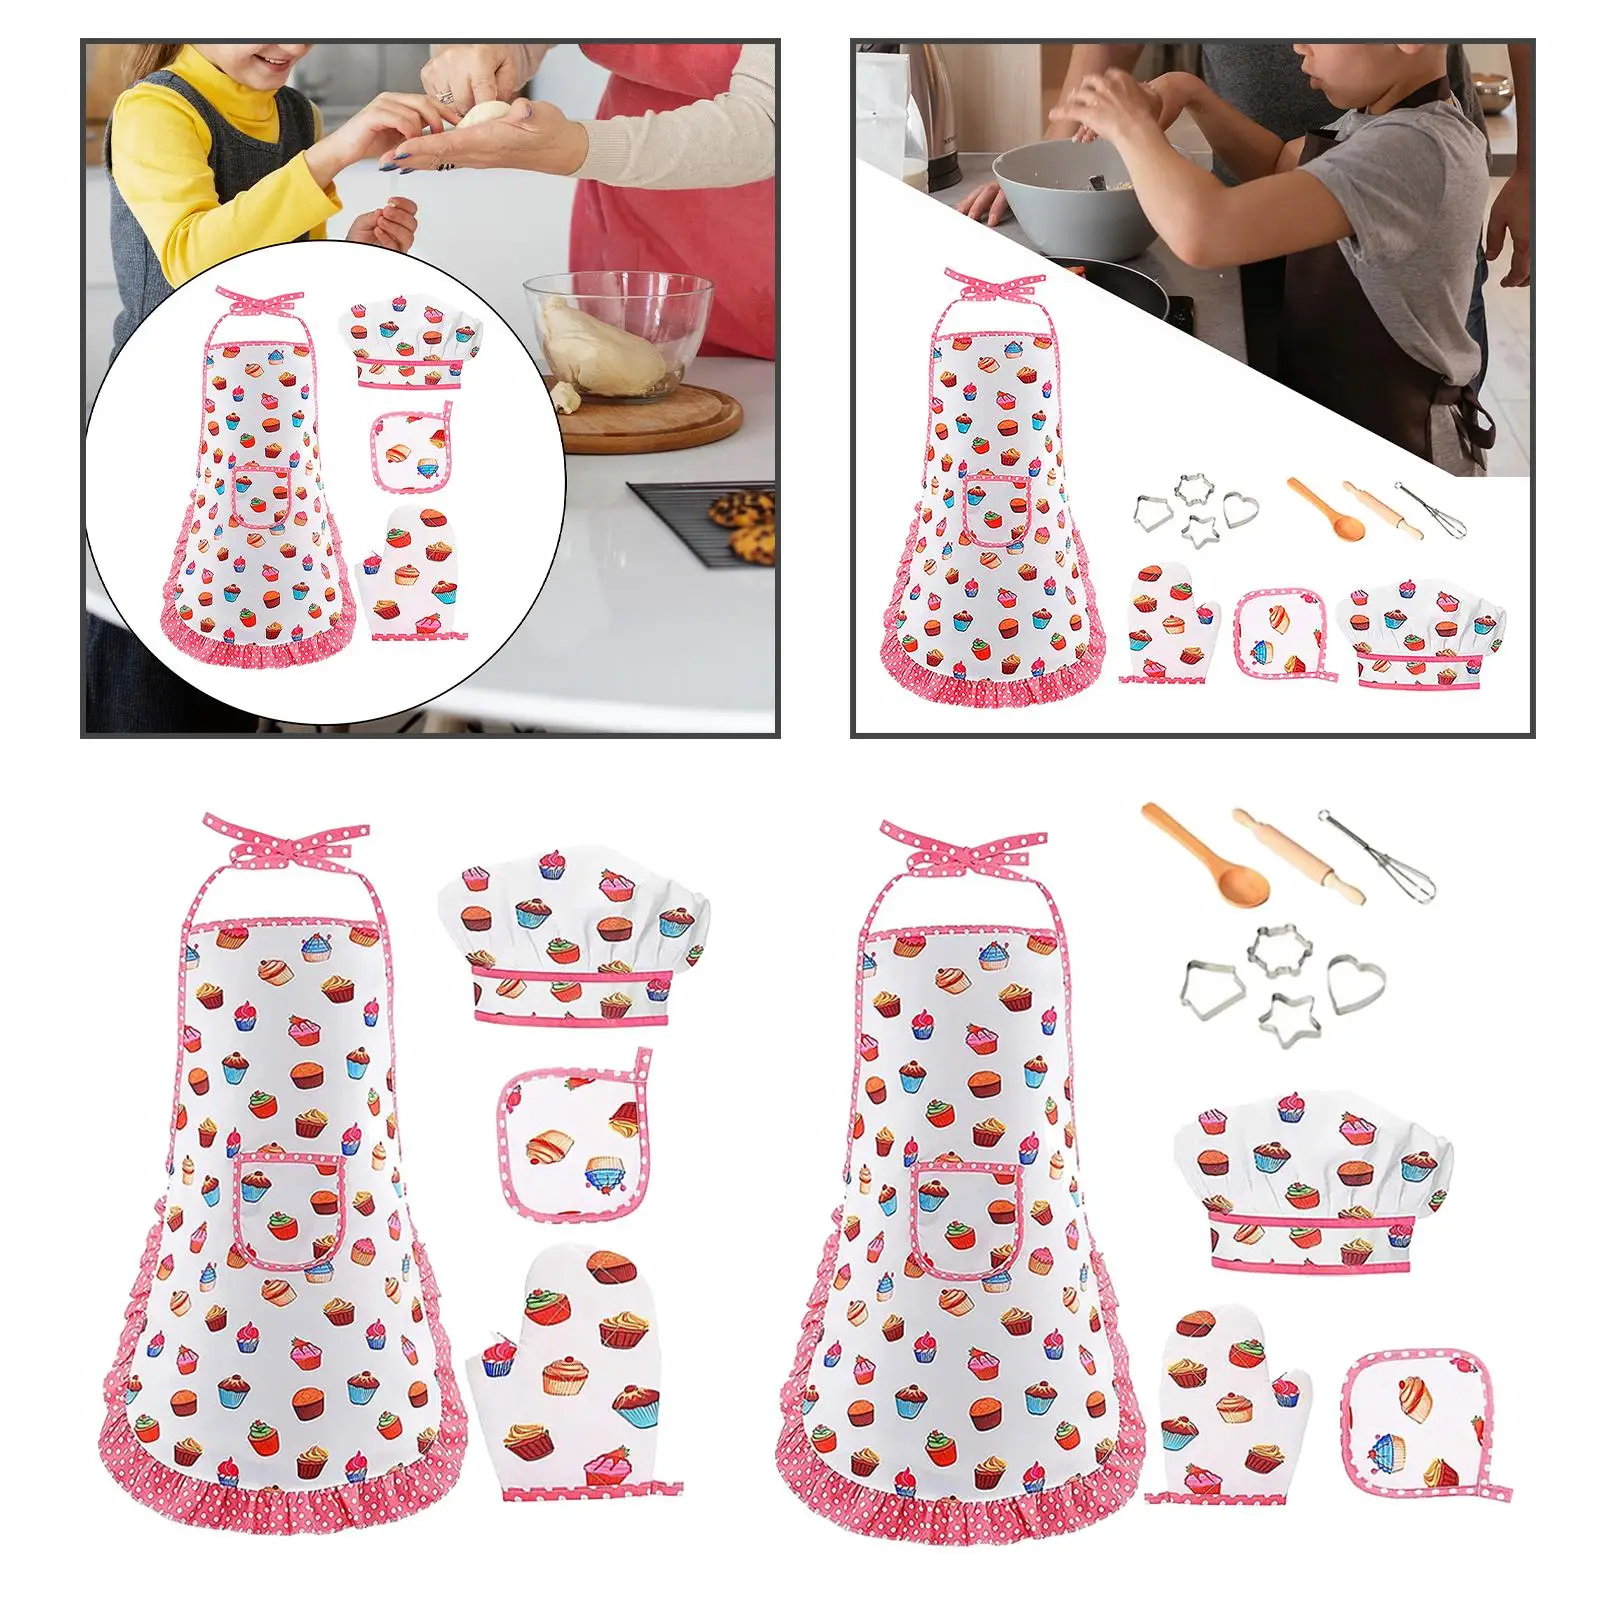 Chef Clothing Set Role Play Toy Developmental Toy Kitchen Costume Set for Kids Gift